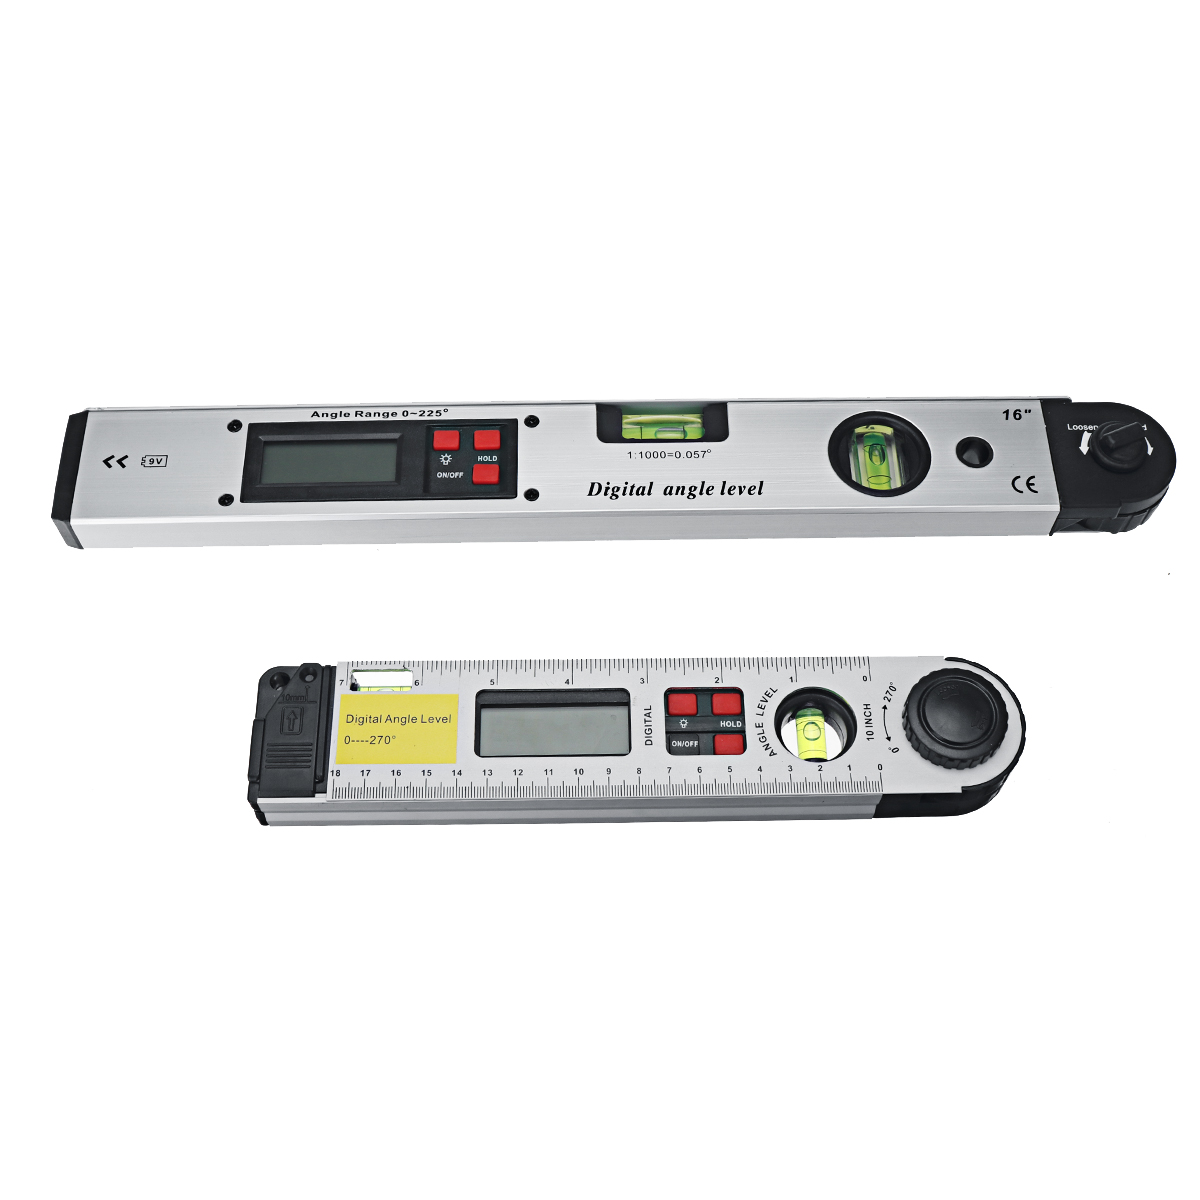 250400mm-Digital-Angle-Level-Meter-LCD-Display-0-225-Degree-for-Measuring-Roof-Angles-Fitting-Up-Win-1740234-5